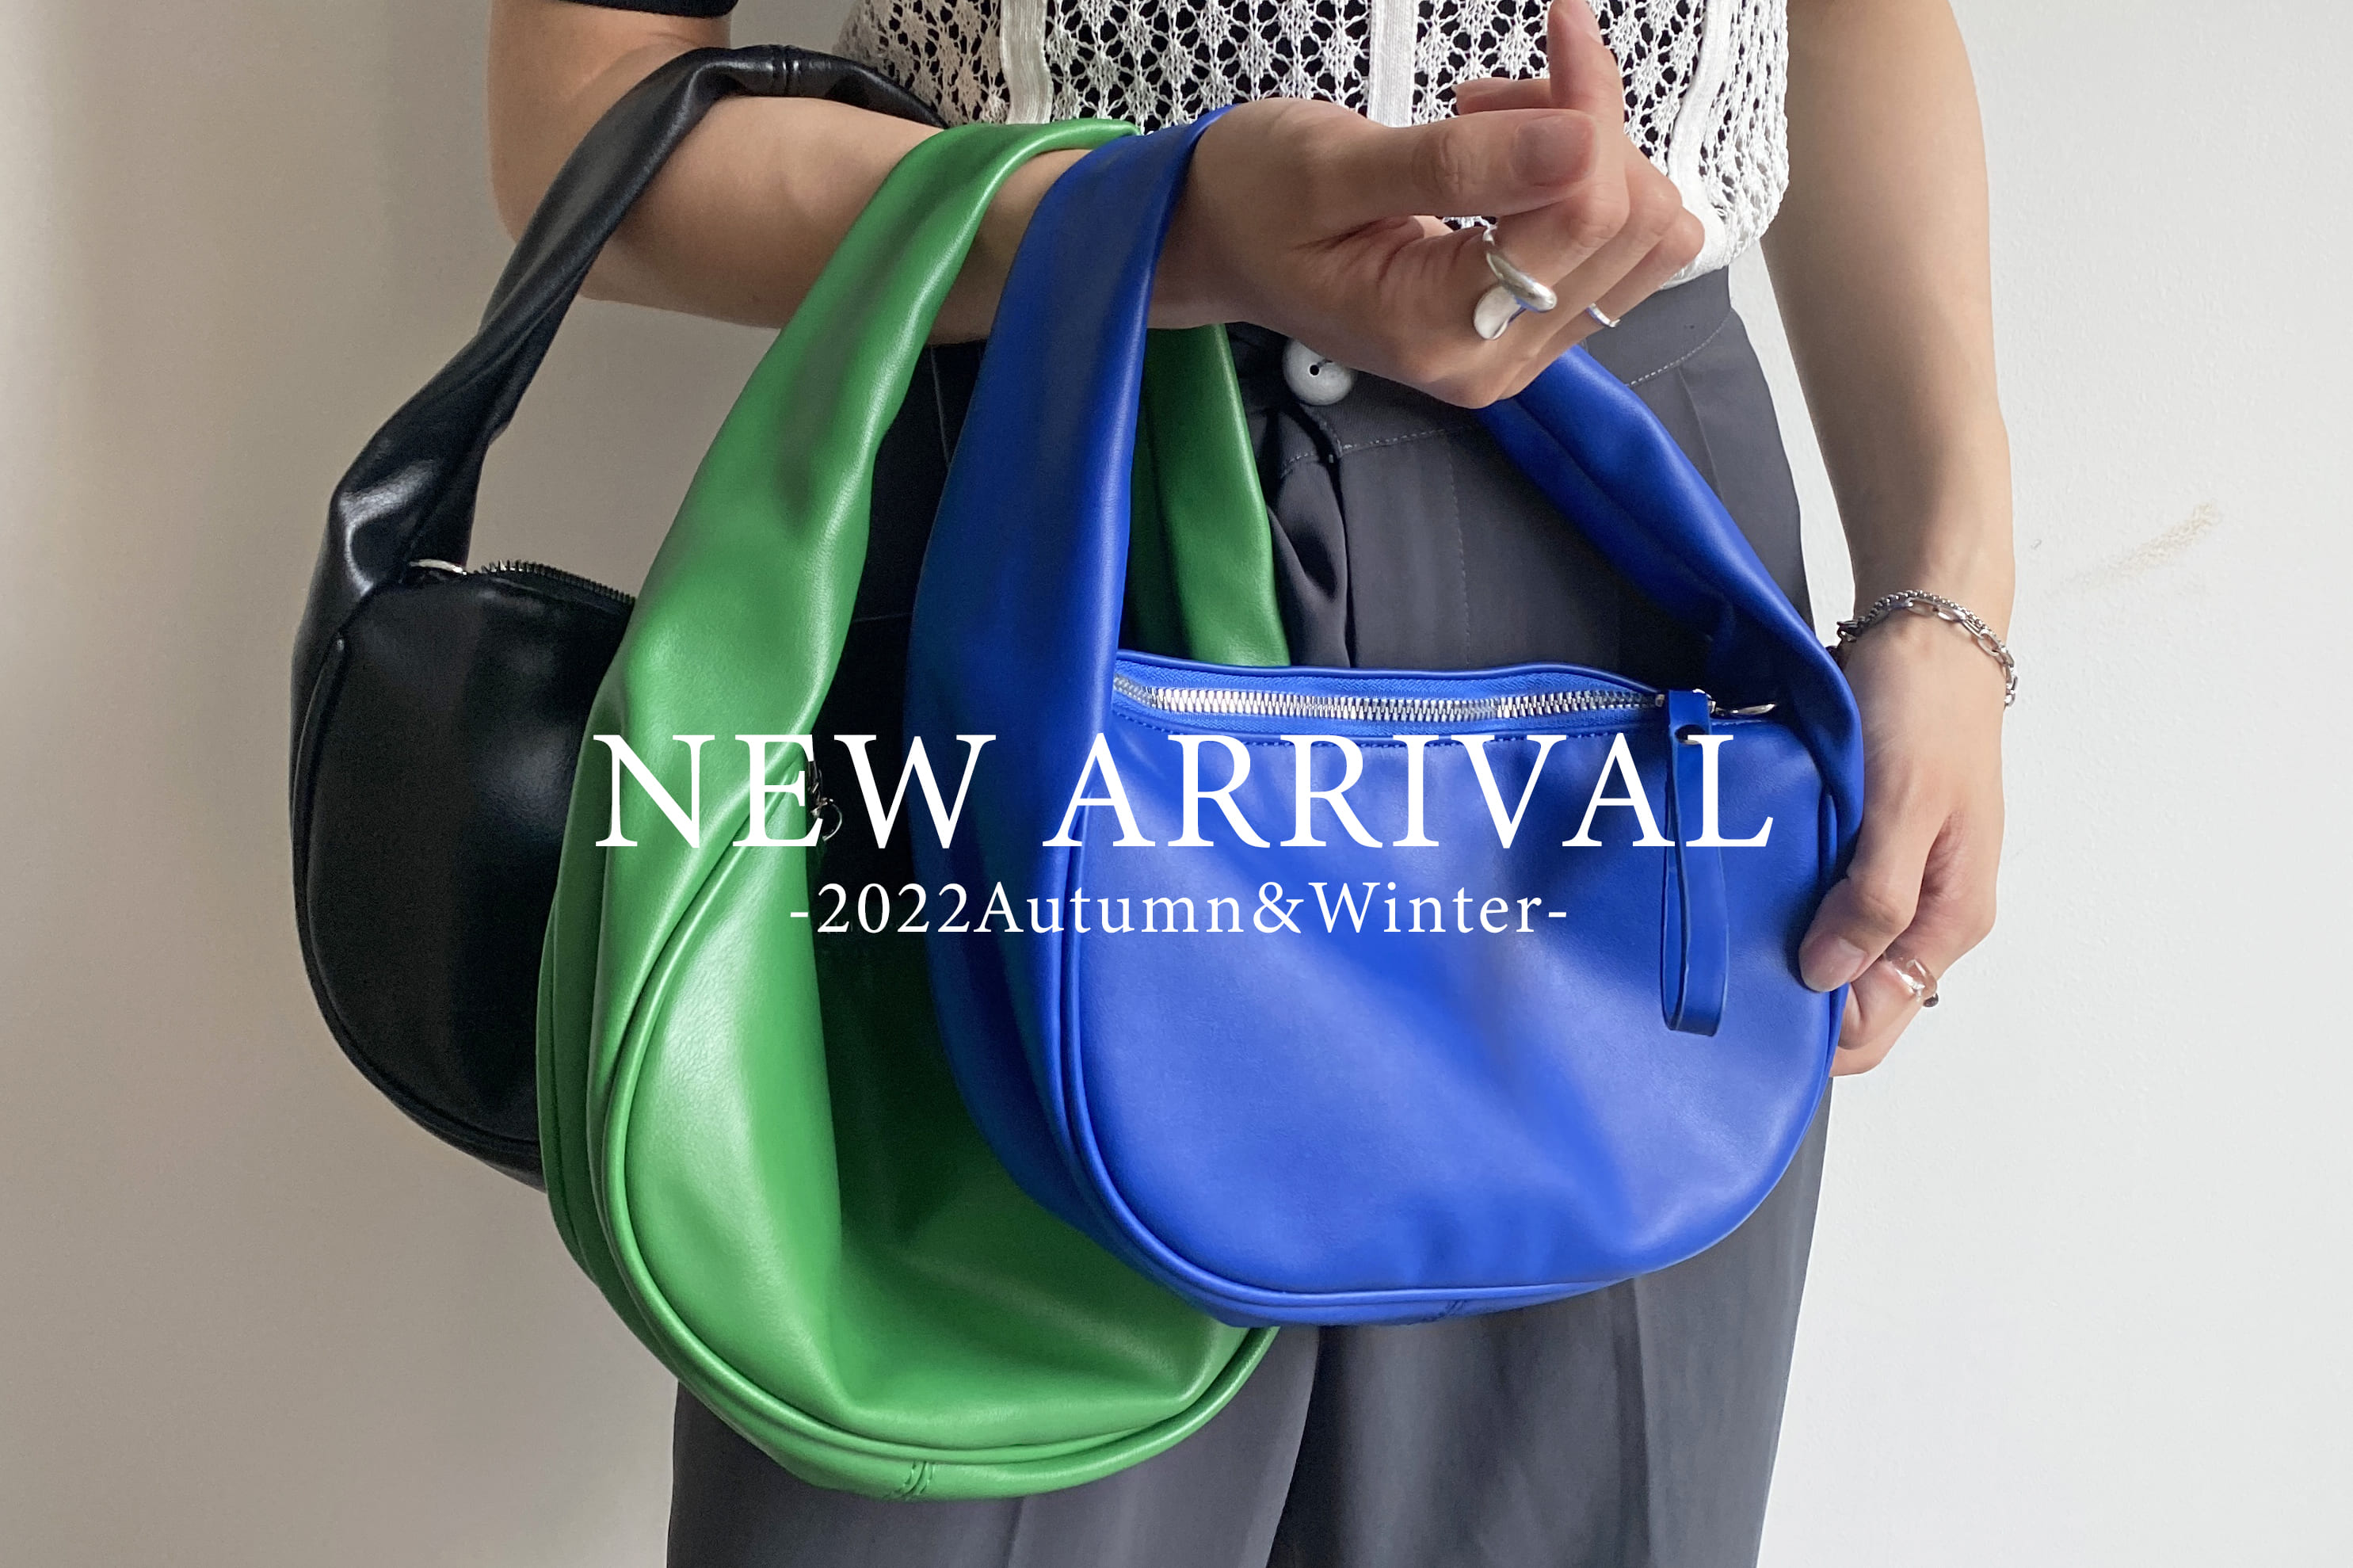 Thevon 【NEW ARRIVAL】今週発売の新作アイテム